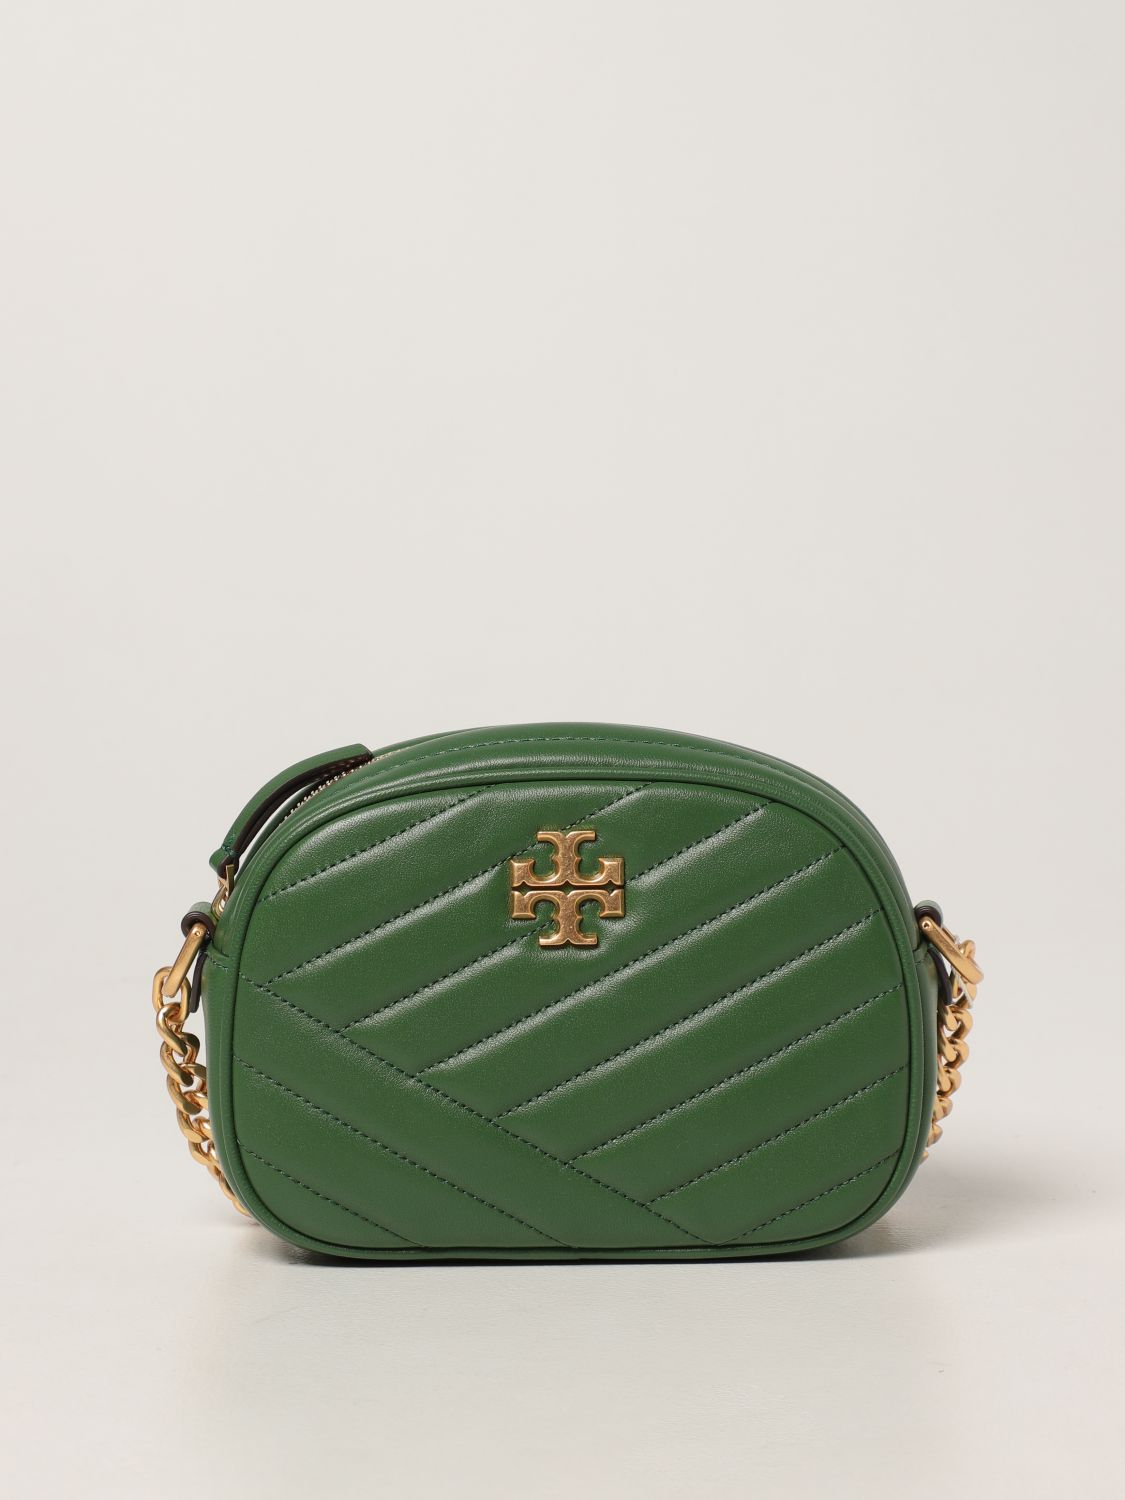 TORY BURCH: Kira shoulder bag in quilted chevron nappa leather - Green | Tory  Burch crossbody bags 60227 online on 